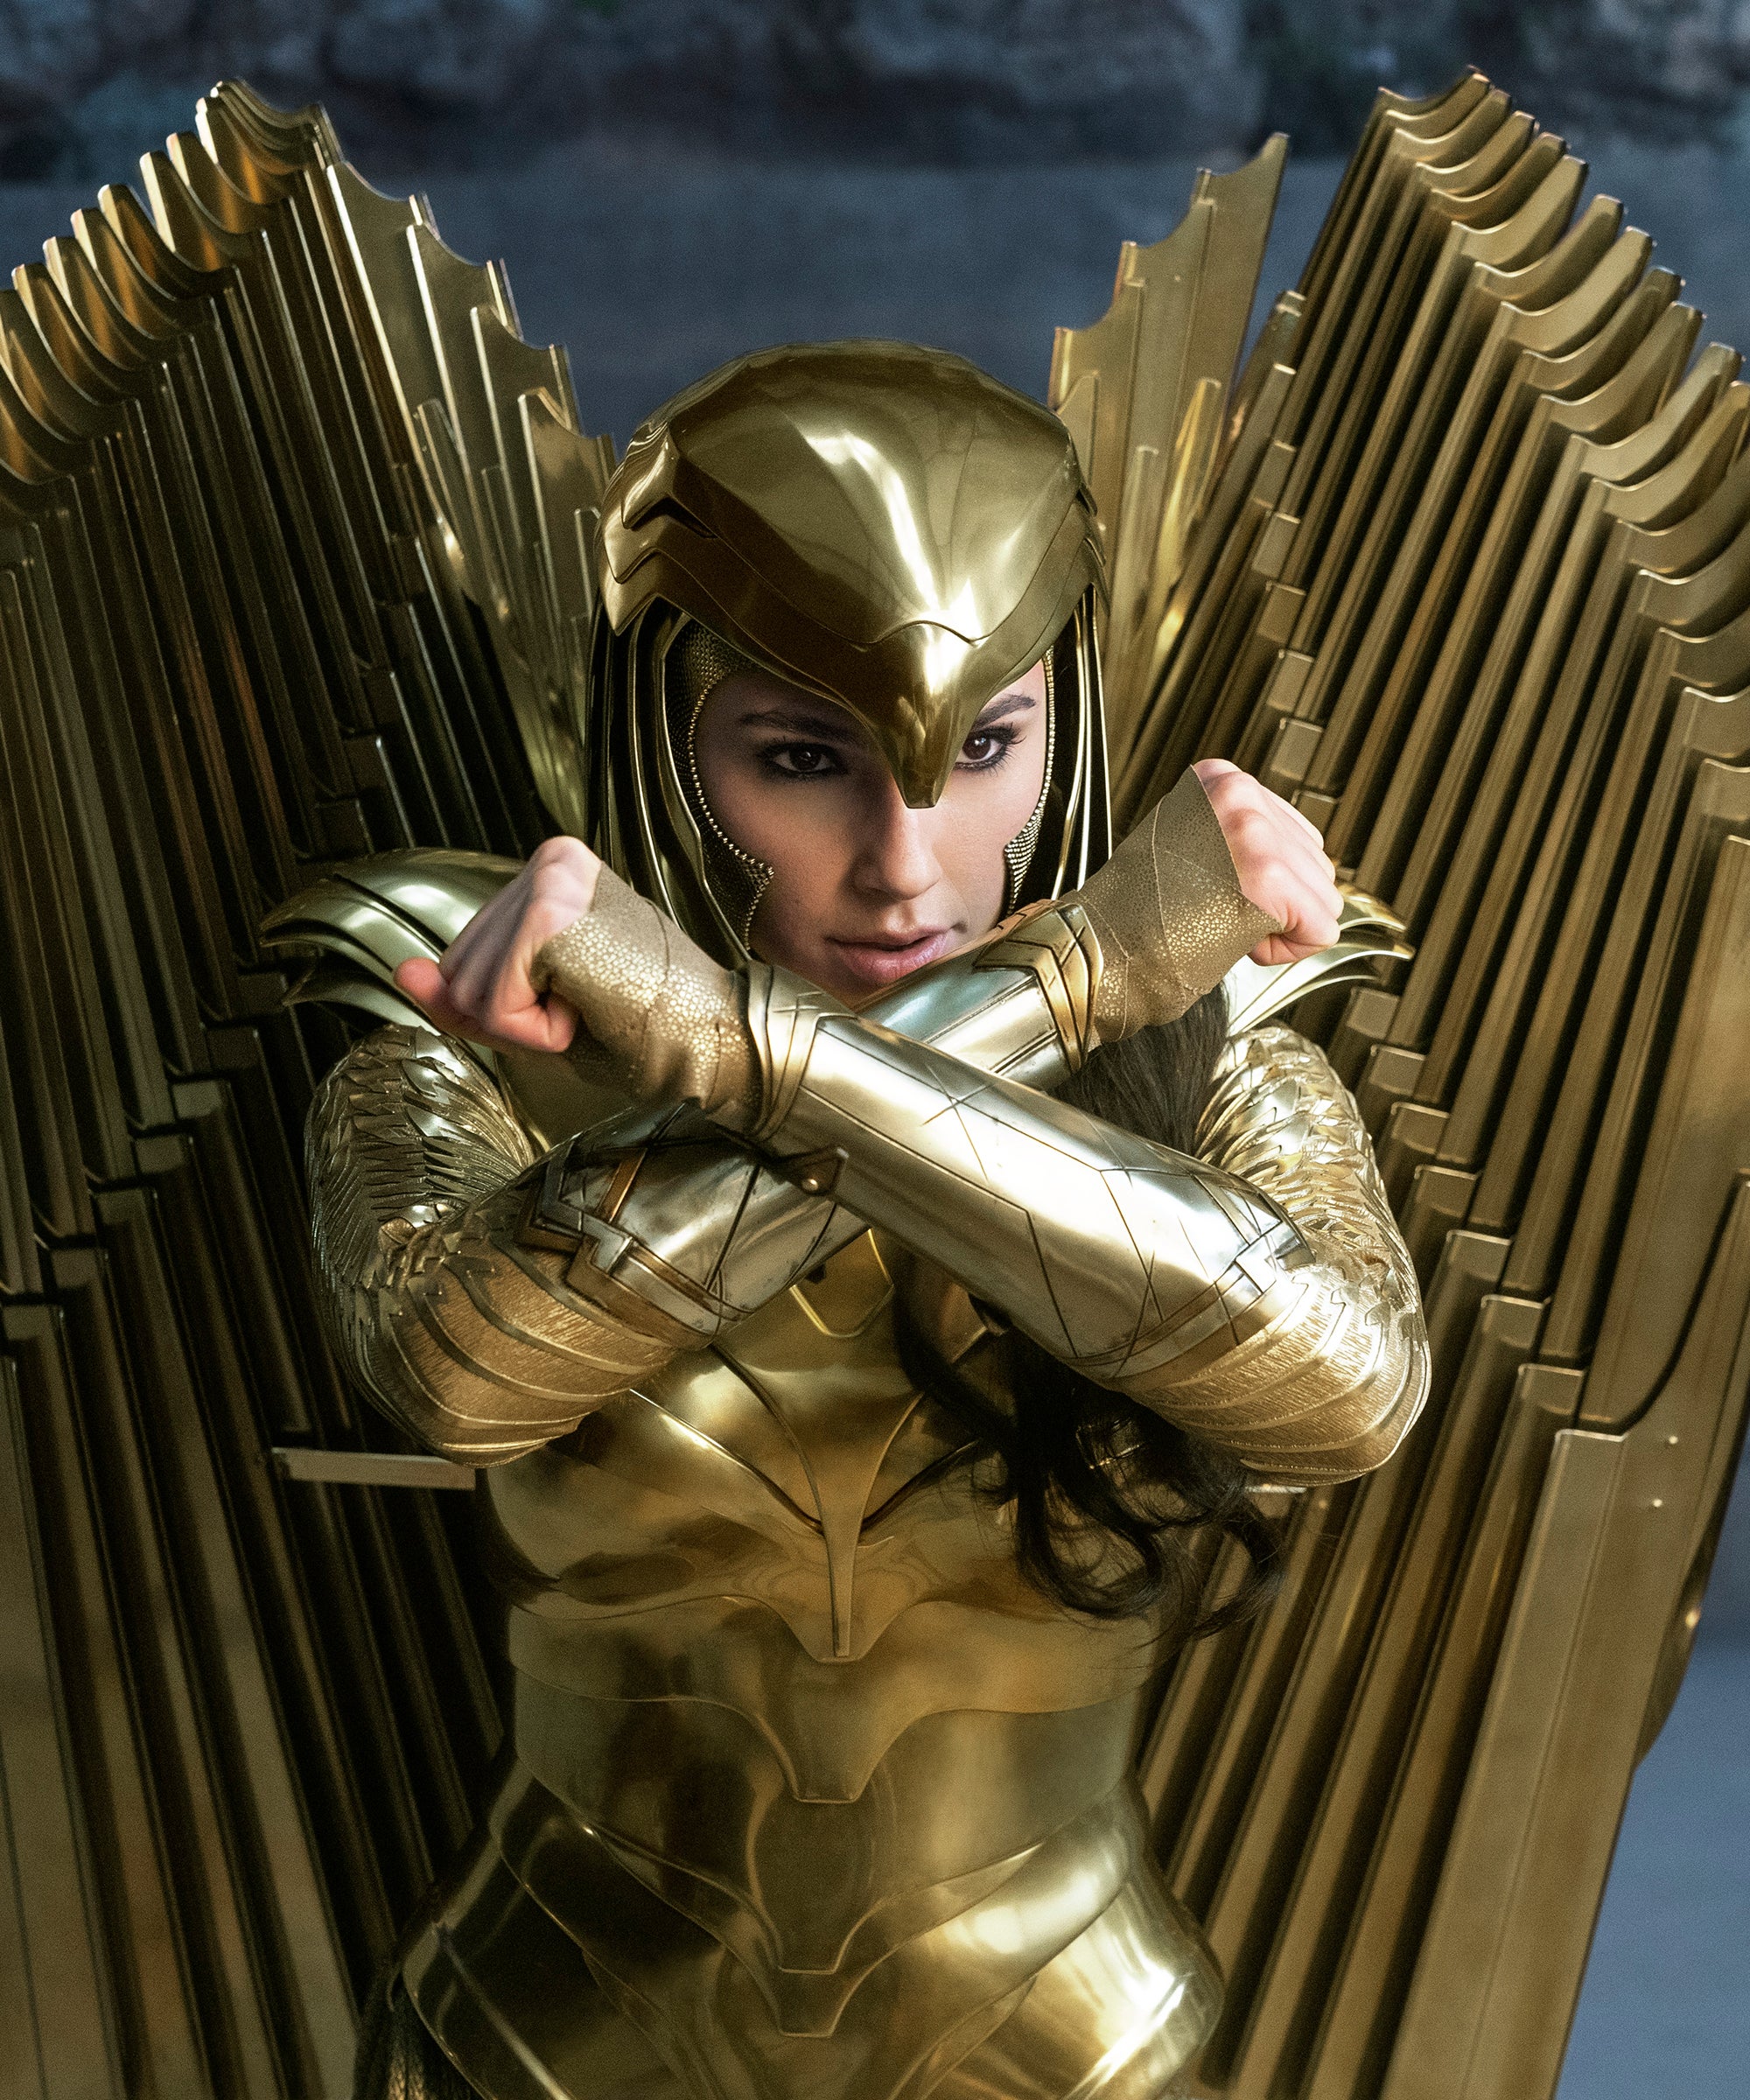 What Wonder Woman 1984 Gold Armor Means In WW History